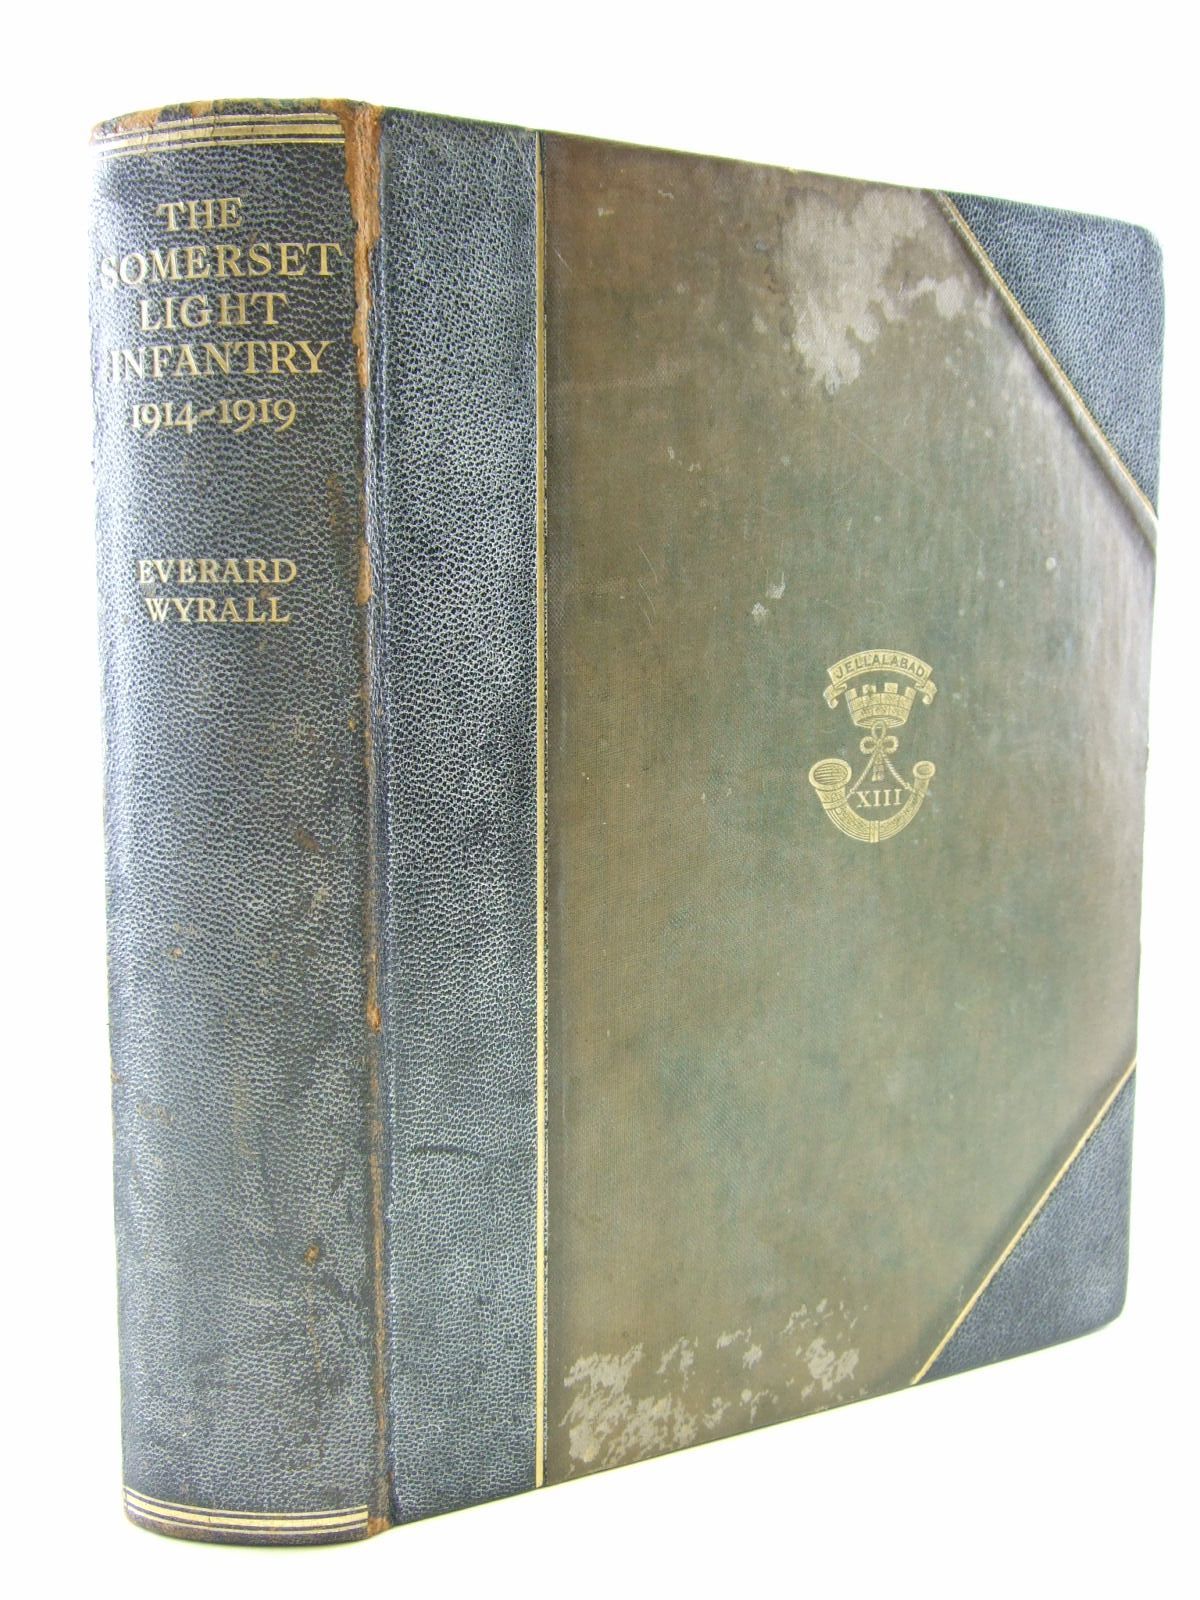 Photo of THE HISTORY OF THE SOMERSET LIGHT INFANTRY (PRINCE ALBERT'S) 1914-1919 written by Wyrall, Everard published by Methuen &amp; Co. Ltd. (STOCK CODE: 2109024)  for sale by Stella & Rose's Books